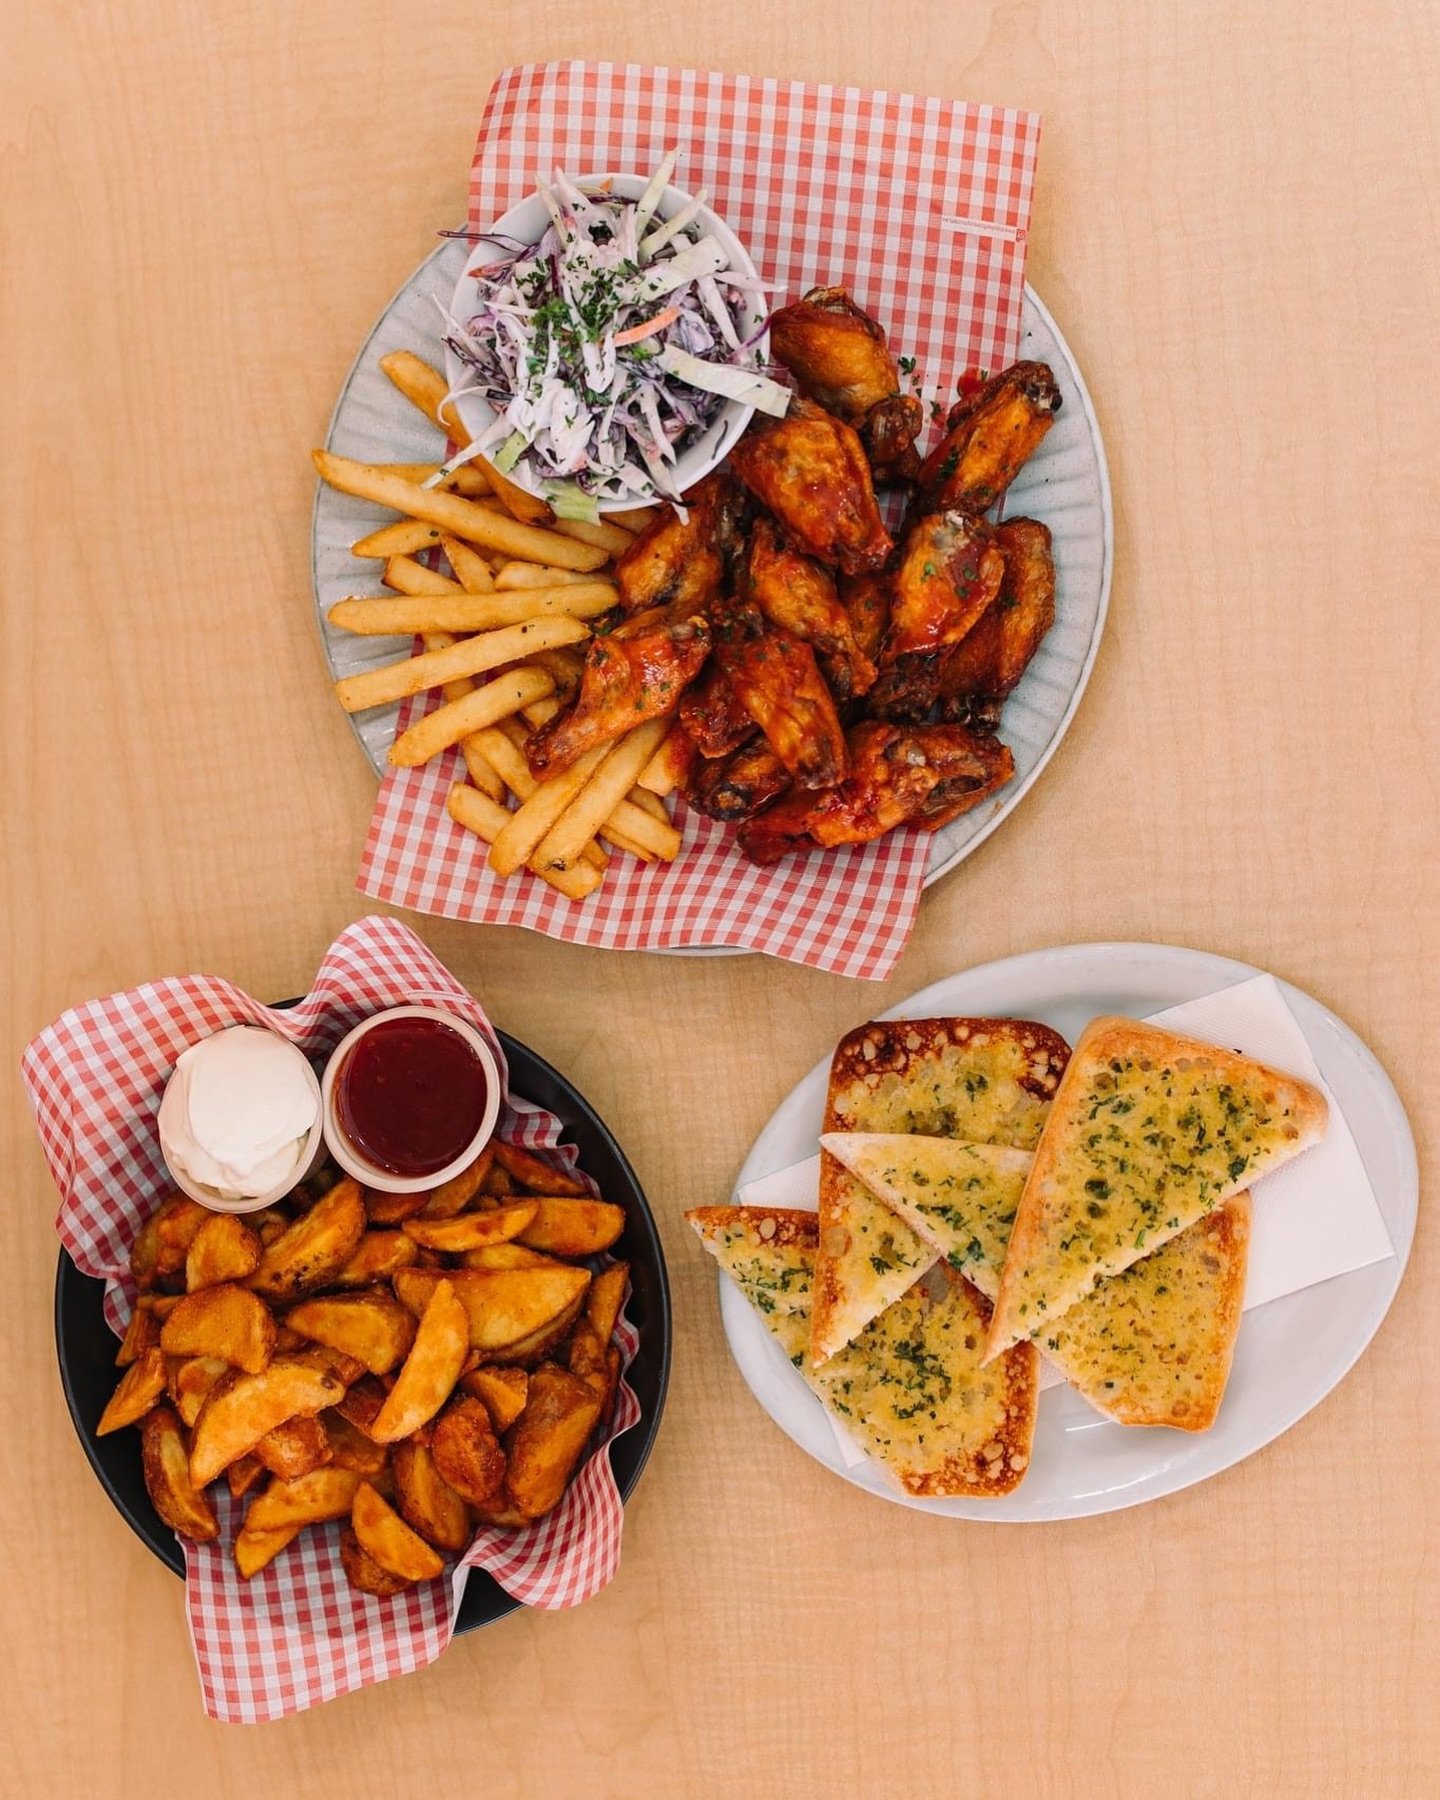 Pick your starter! 🤔

Garlic bread, wedges, wings... or maybe all three? 😋

Book here to get yours via the link in our bio!